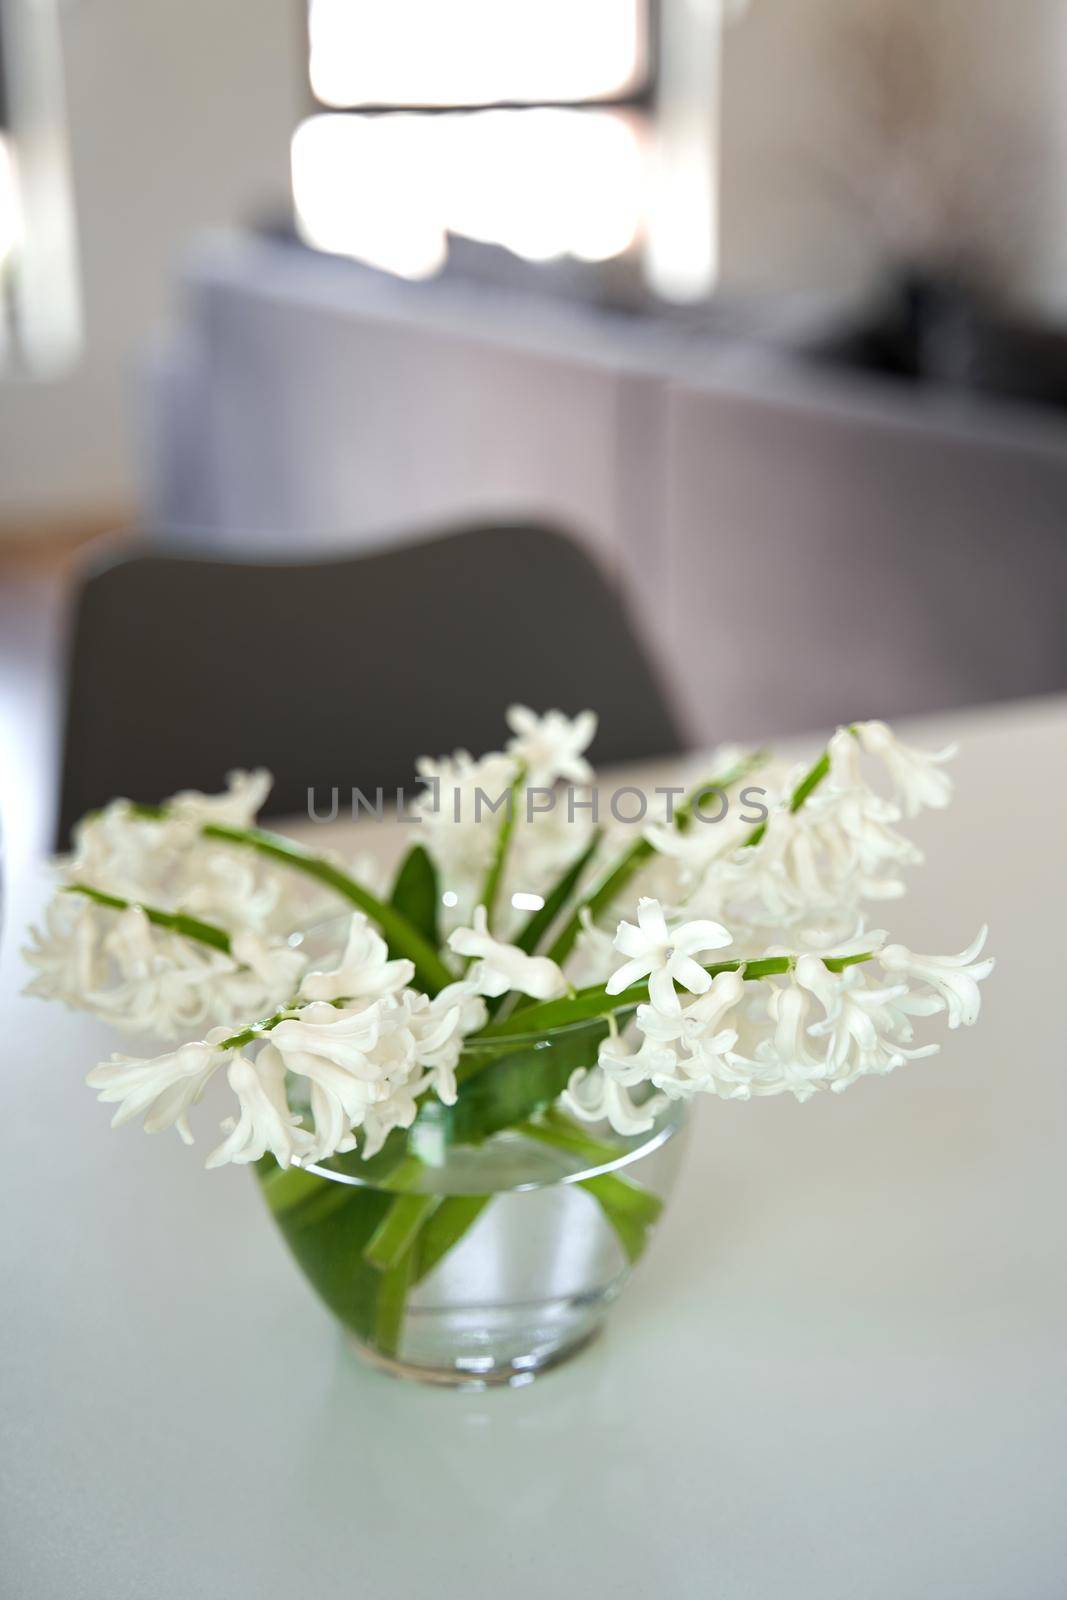 White living room interior decorated with fresh flowers in glass vase by Try_my_best